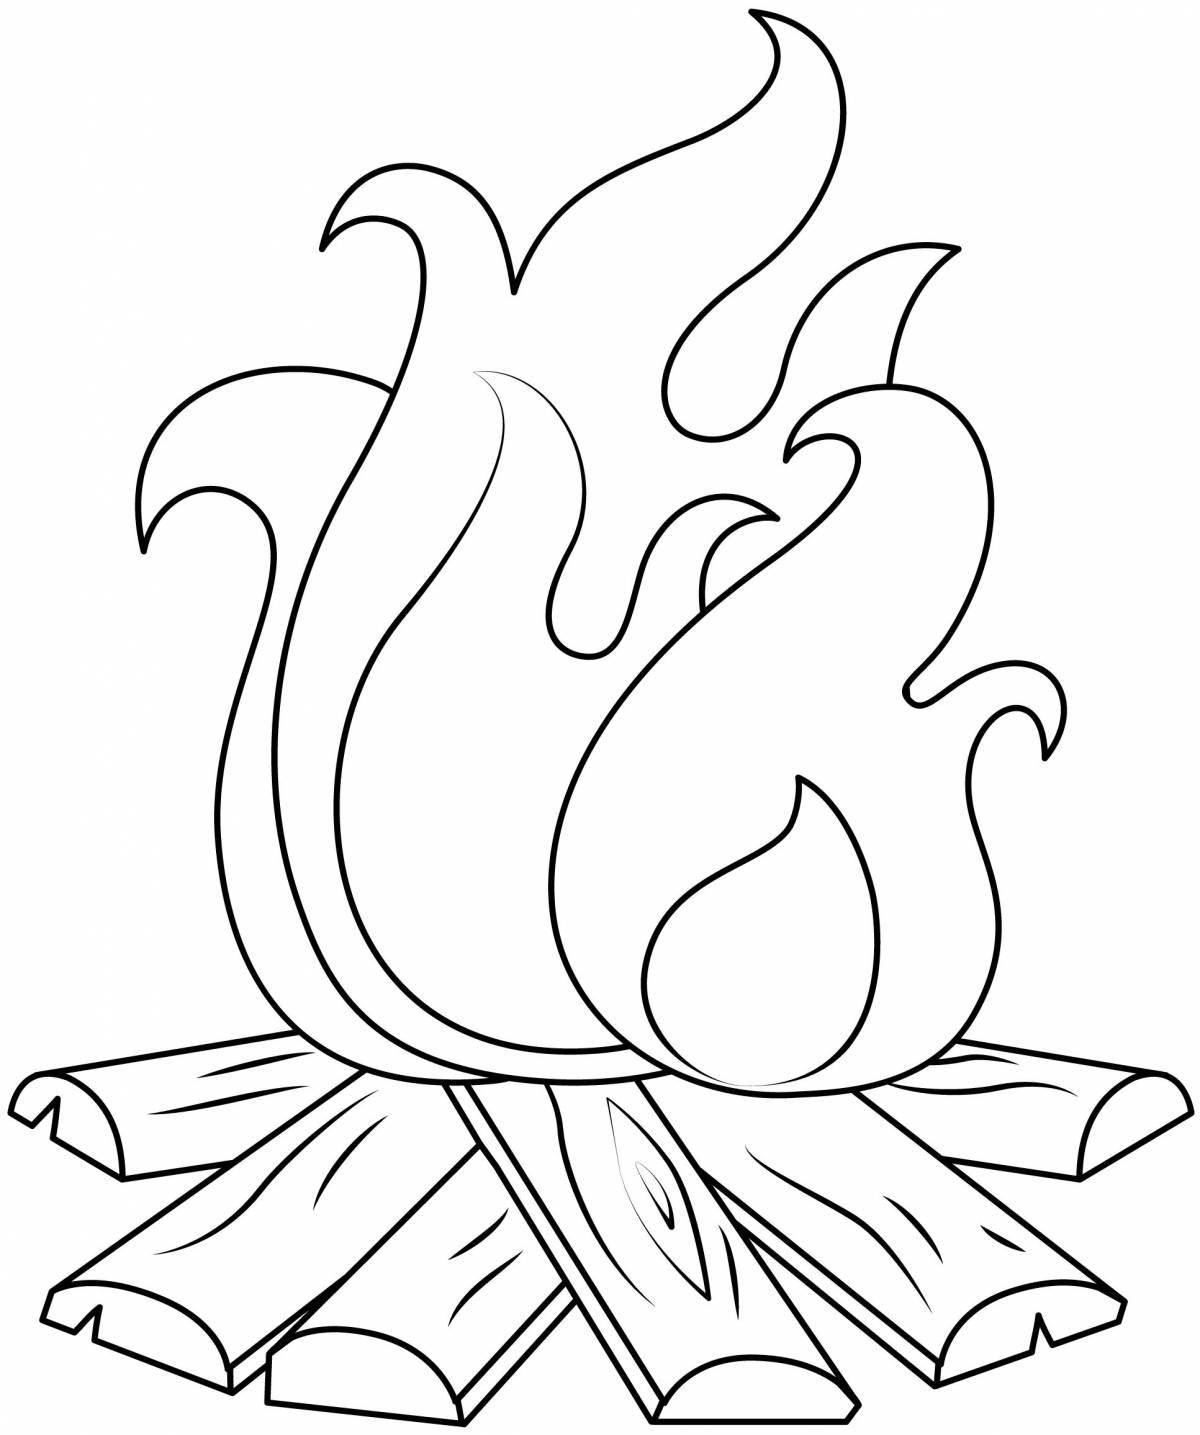 Animated fire coloring page for 3-4 year olds